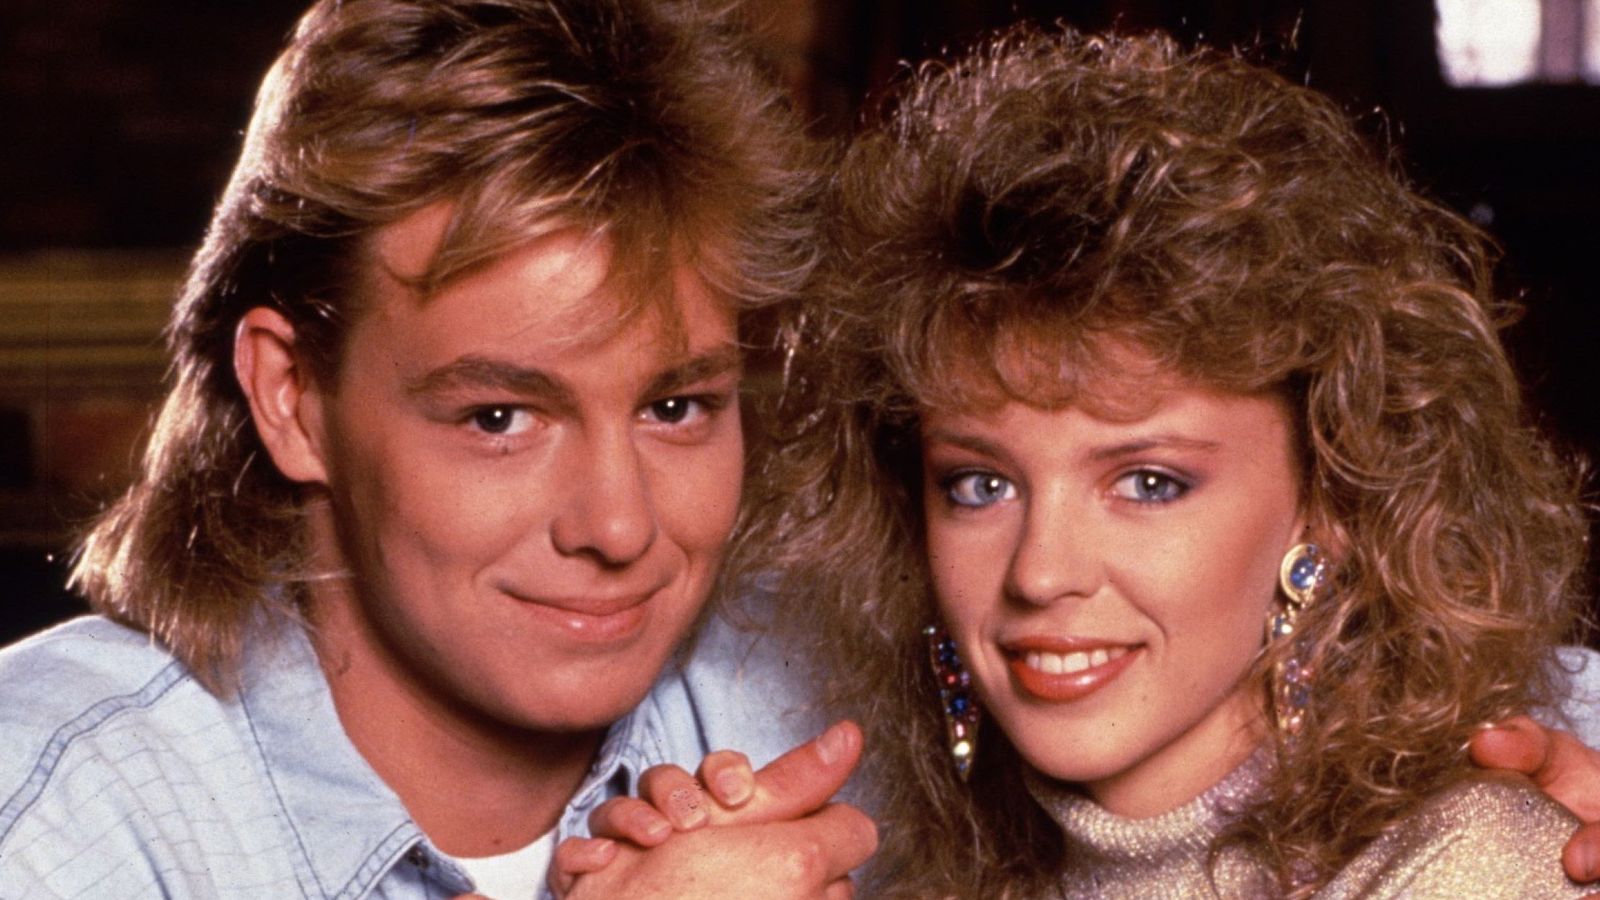 Neighbours stars who have gone big: From Kylie to Dave Bautista, Soaps